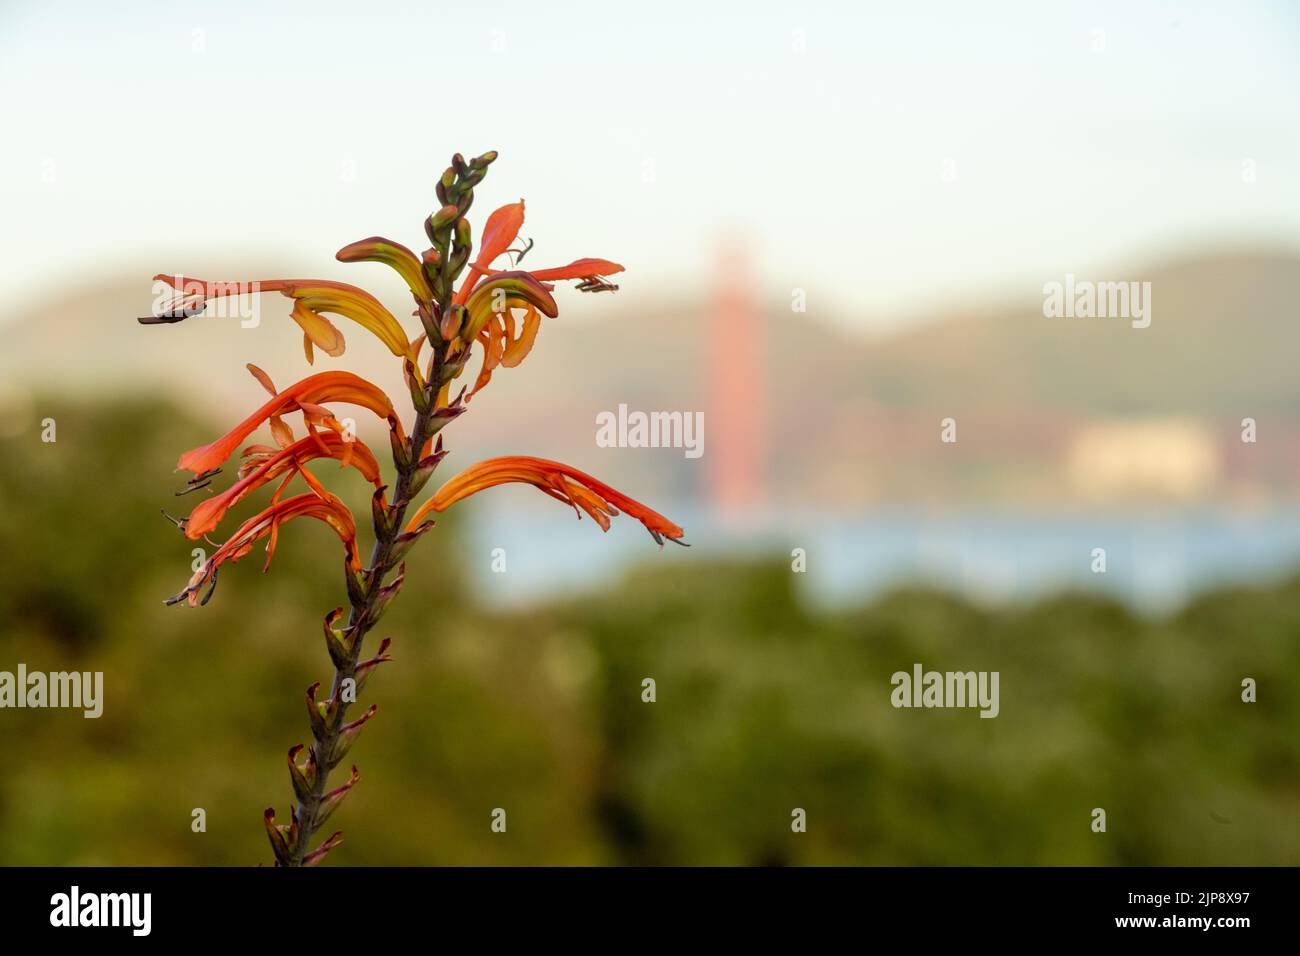 Insect Perched On Watsonia Flower With The Golden Gate In The Distance with selective focus Stock Photo